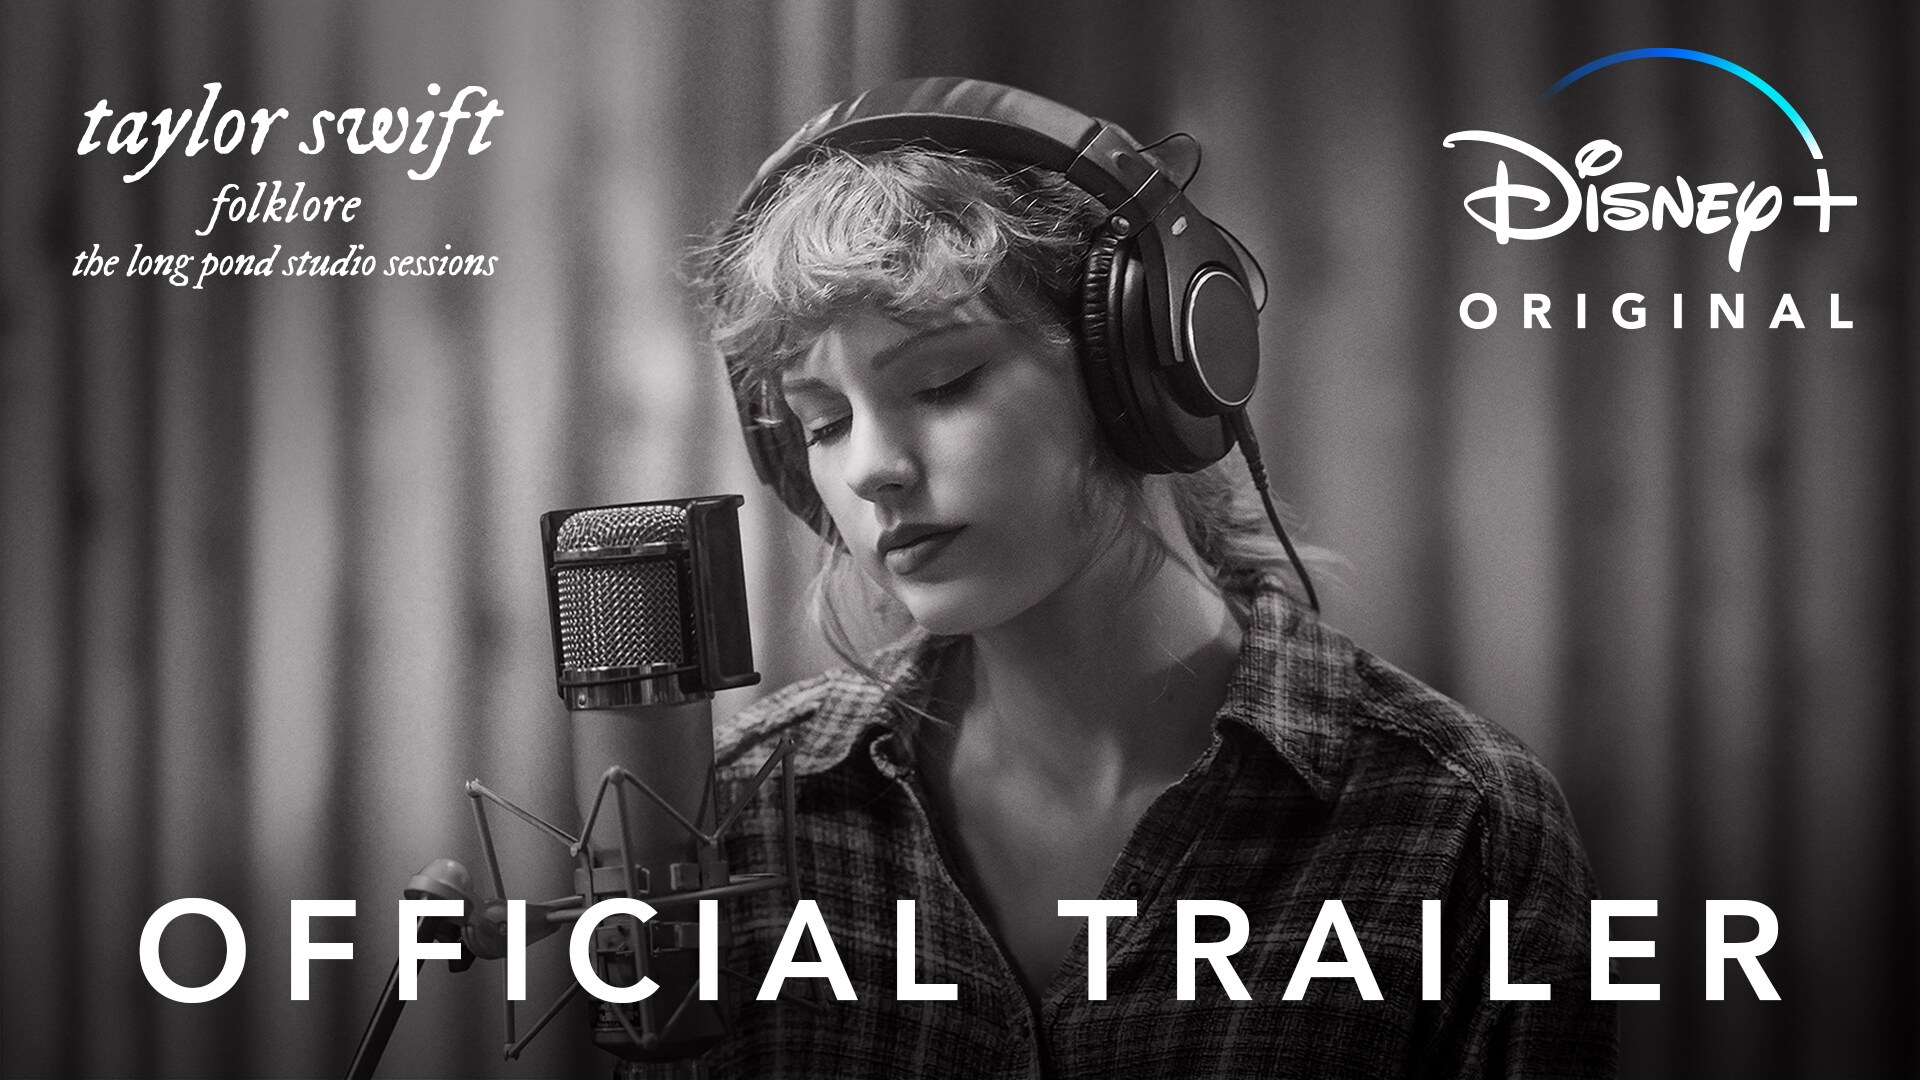 Taylor Swift – folklore: the long pond studio sessions | Official Trailer |  Disney+